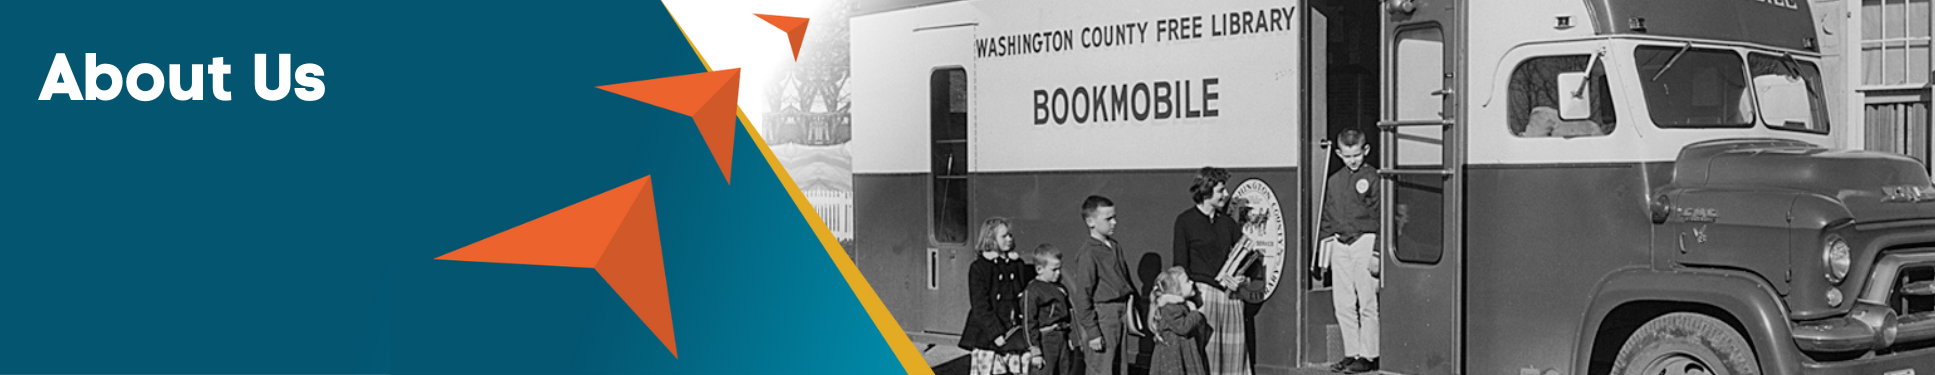 About Us banner with three orange arrows pointing at black and white image of Bookmobile with children in front.